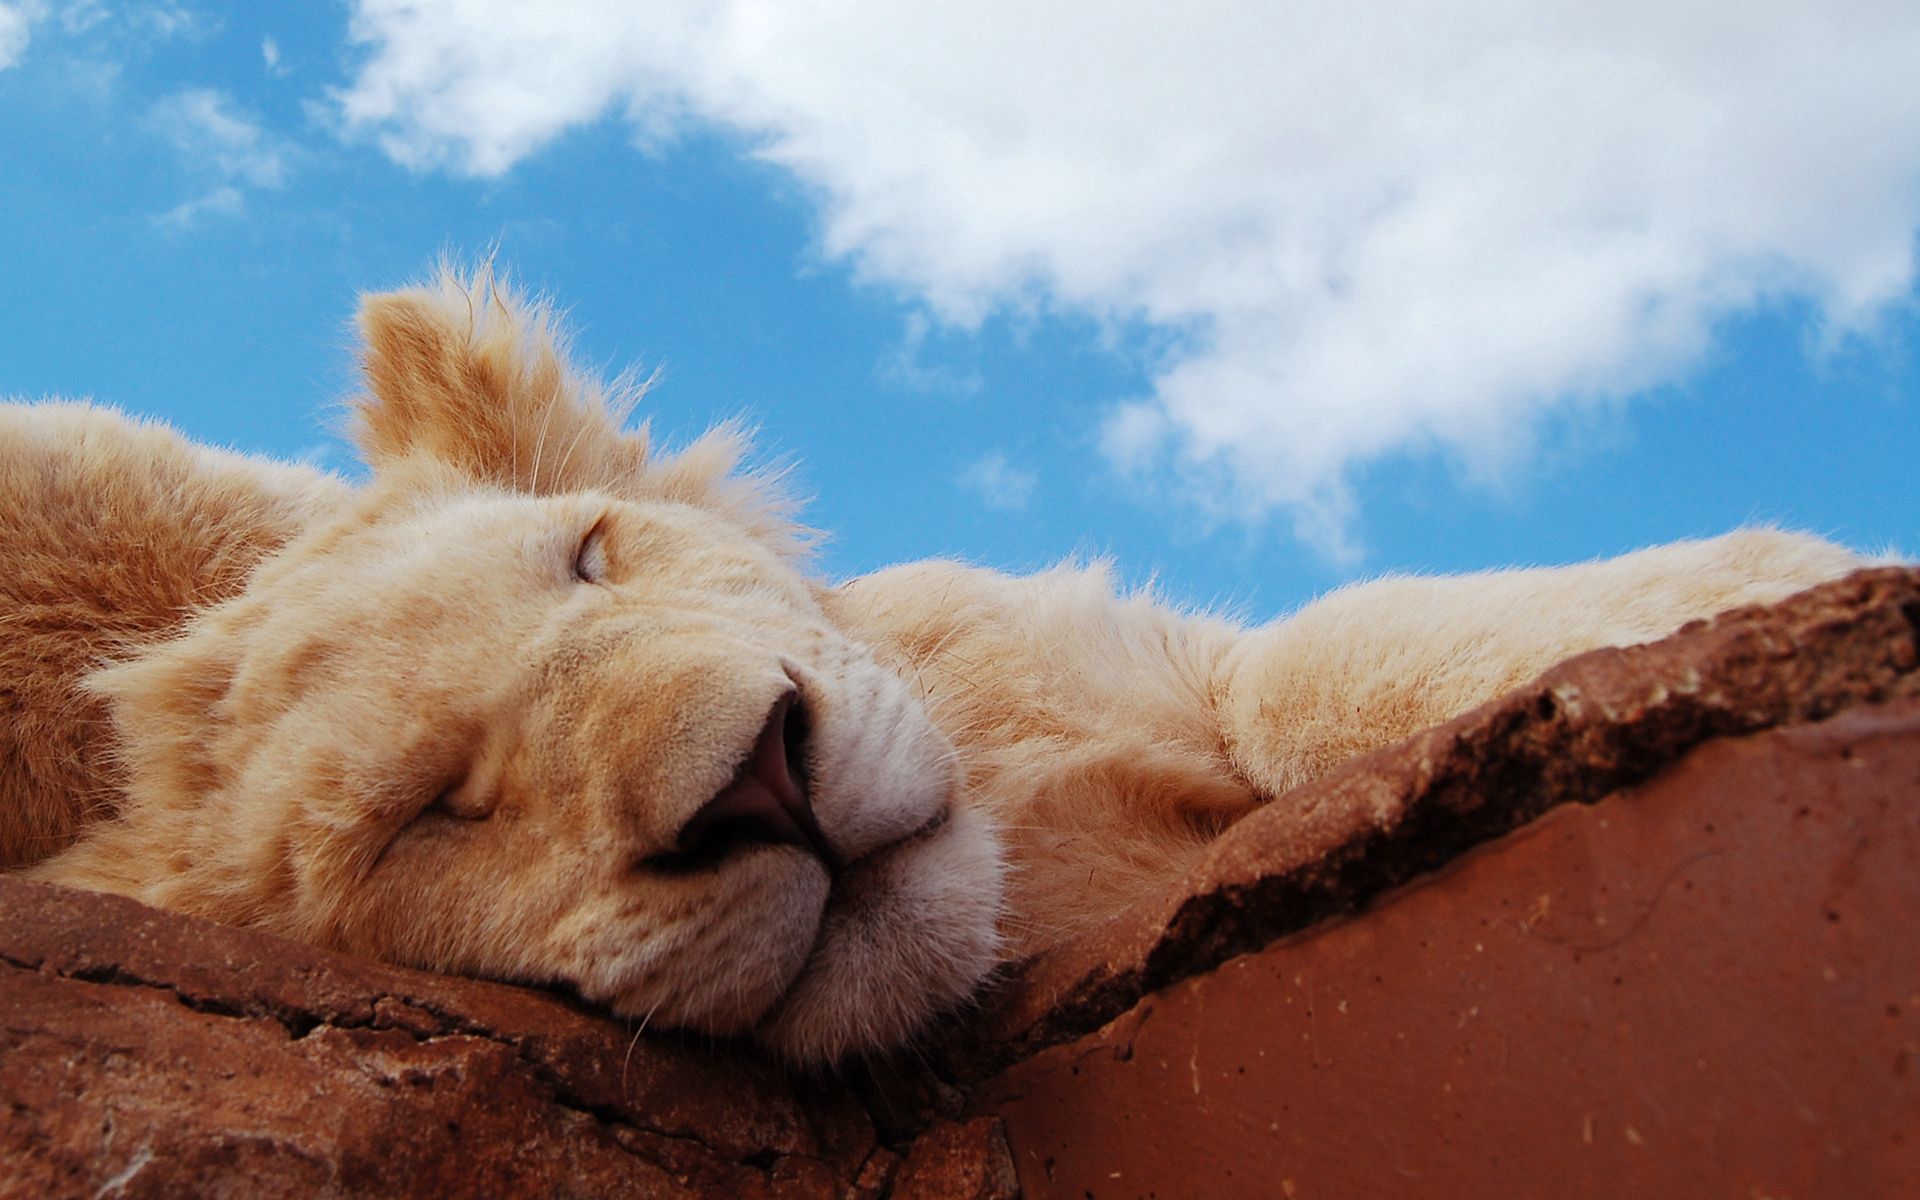 animals, clouds, young, muzzle, lion, sleep, dream, joey, lion cub